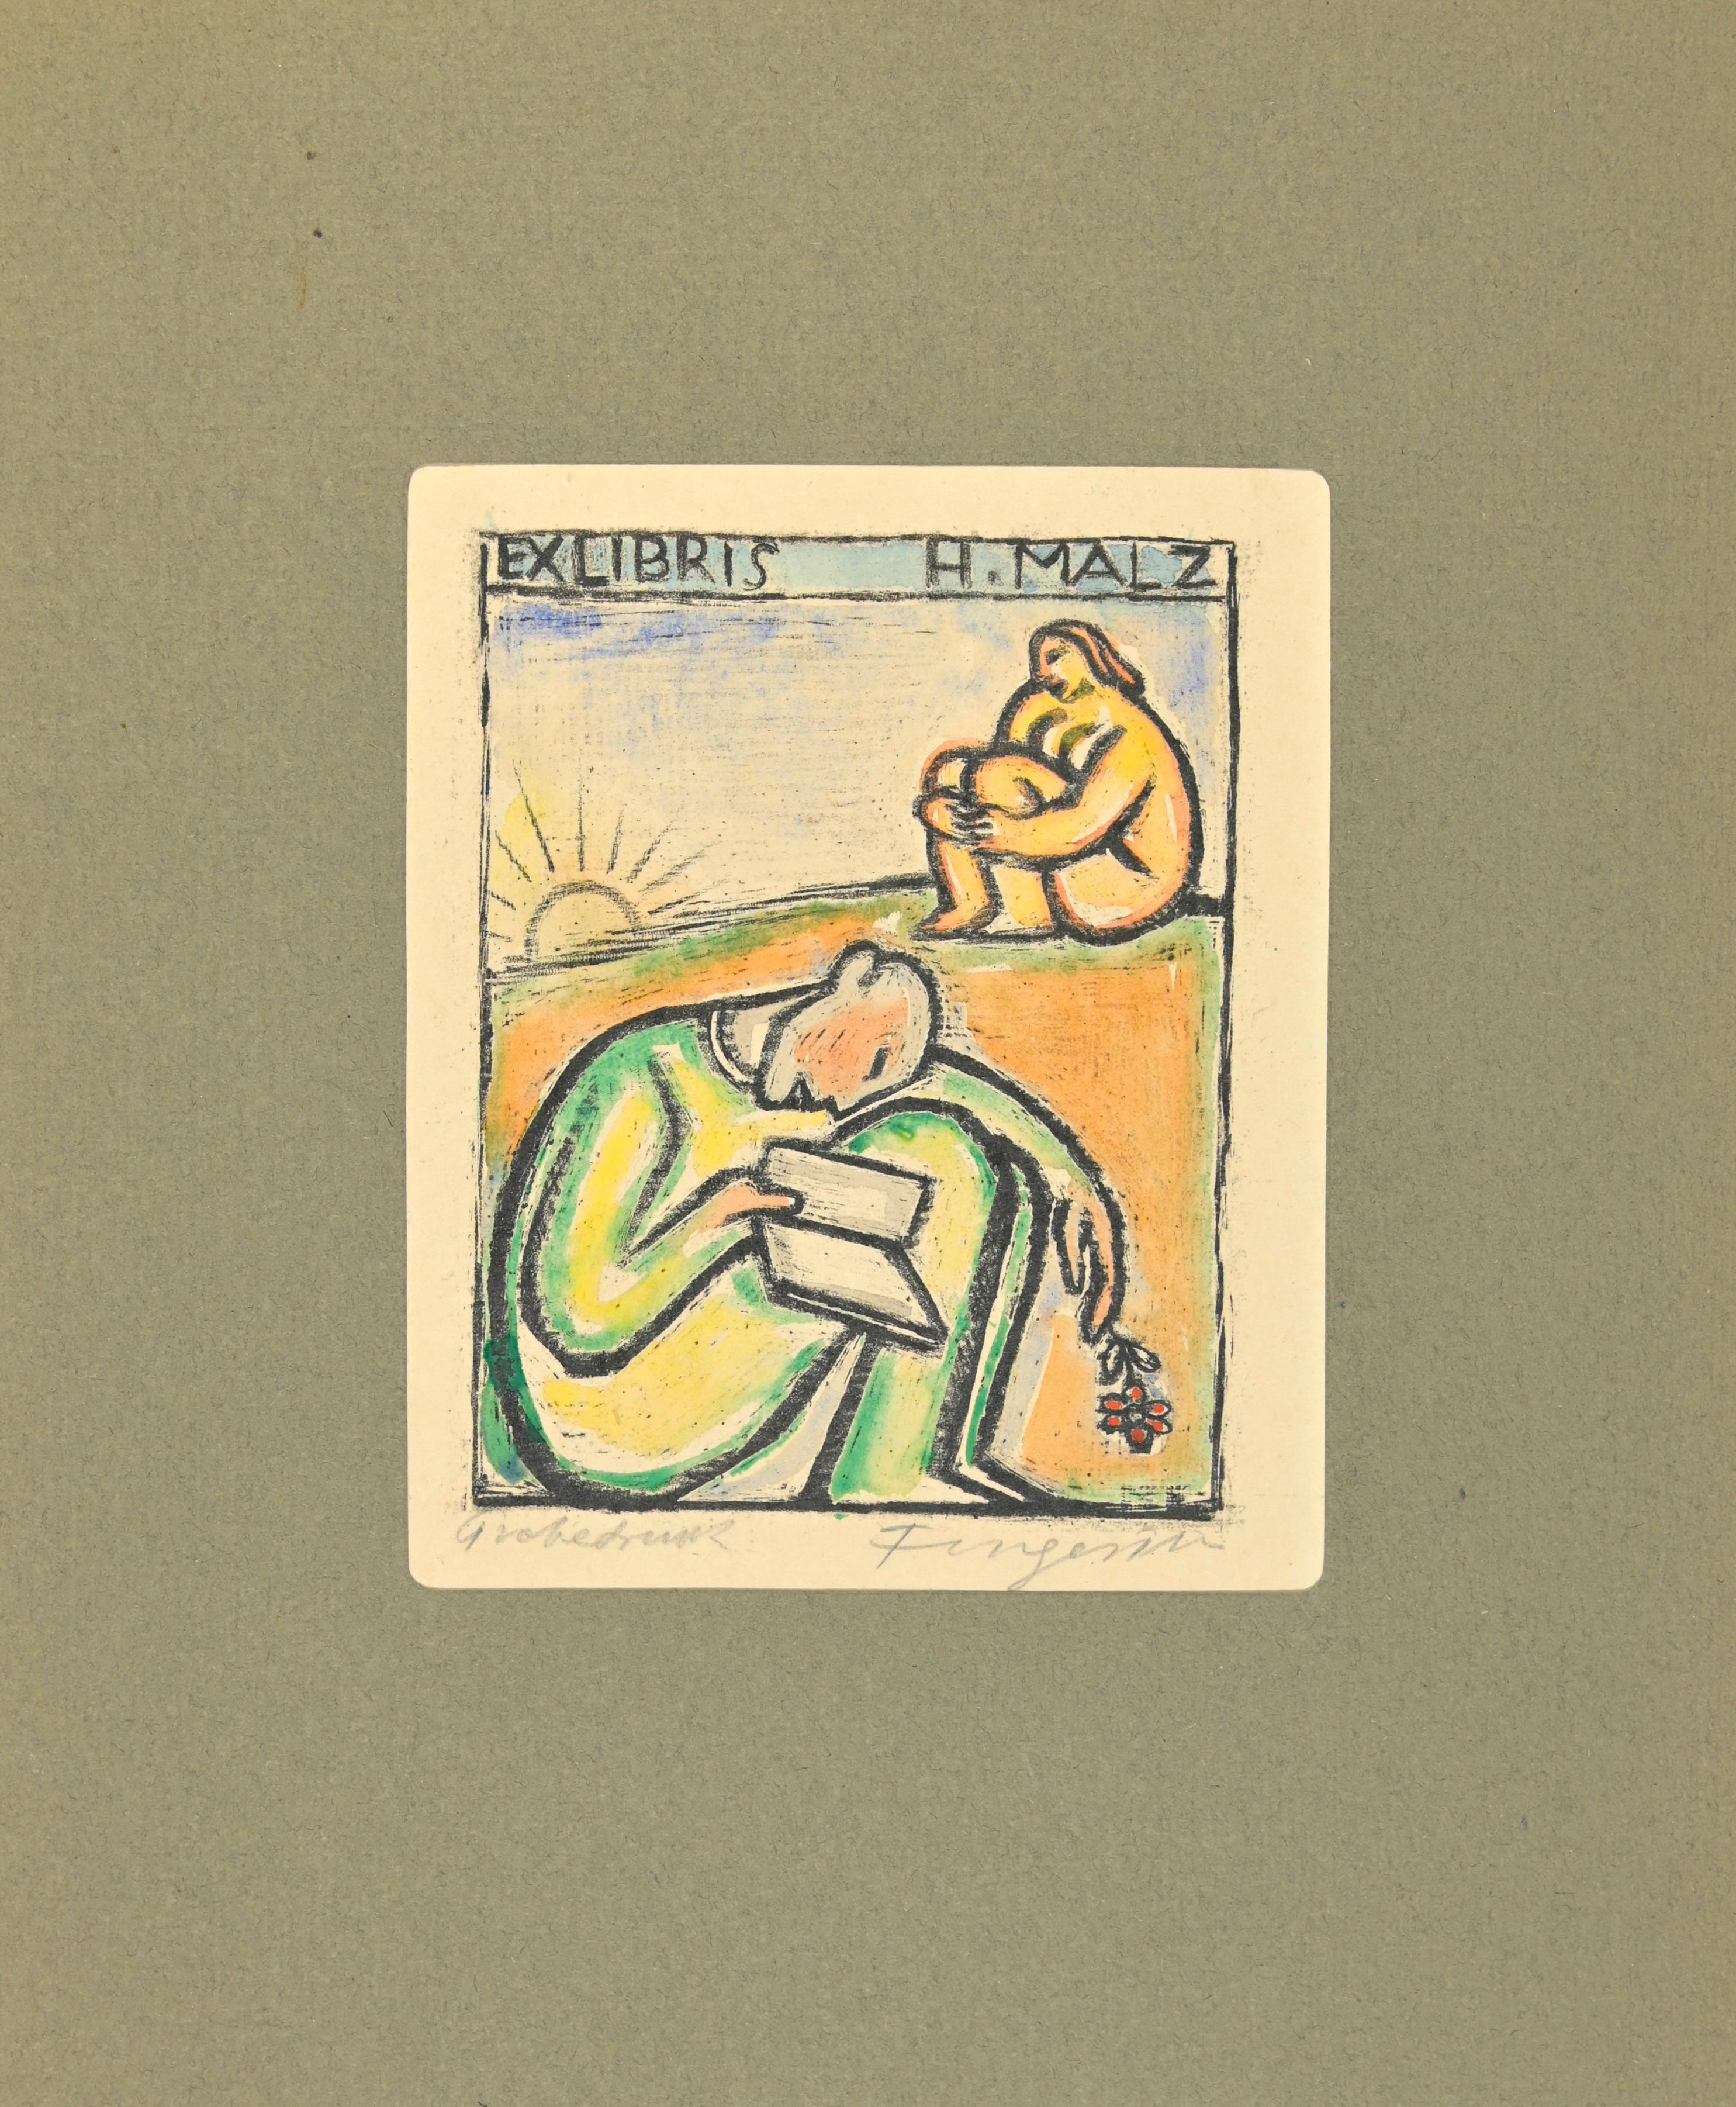 Ex Libris - H. Malz is a colored Woodcut print created by  Michel Fingesten.

Hand Signed on the lower right margin. 

The artwork is glued on cardboard.

Total dimensions: 29 x 22.5 cm.

Good conditions.

Michel Fingesten (1884 - 1943) was a Czech